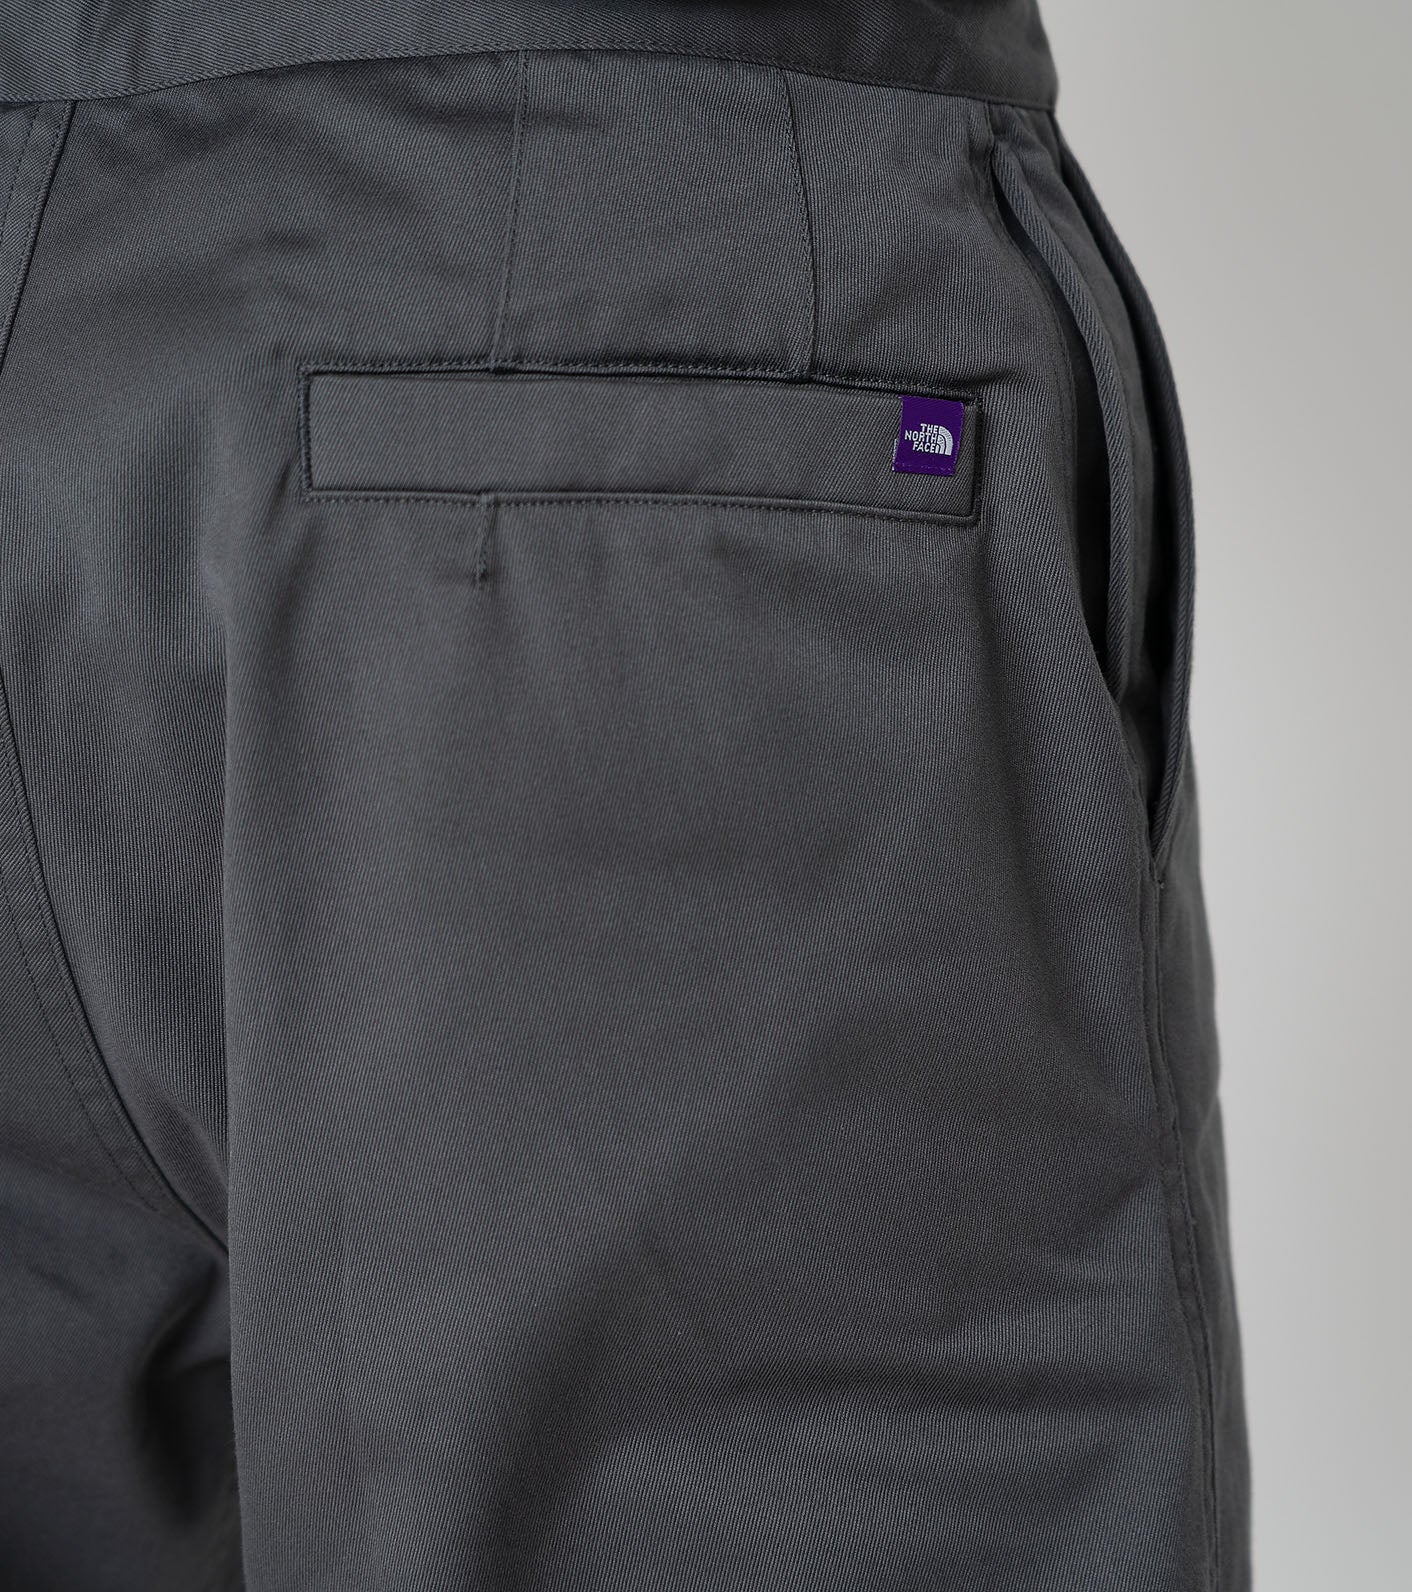 THE NORTH FACE PURPLE LABEL Chino Straight Field Pants